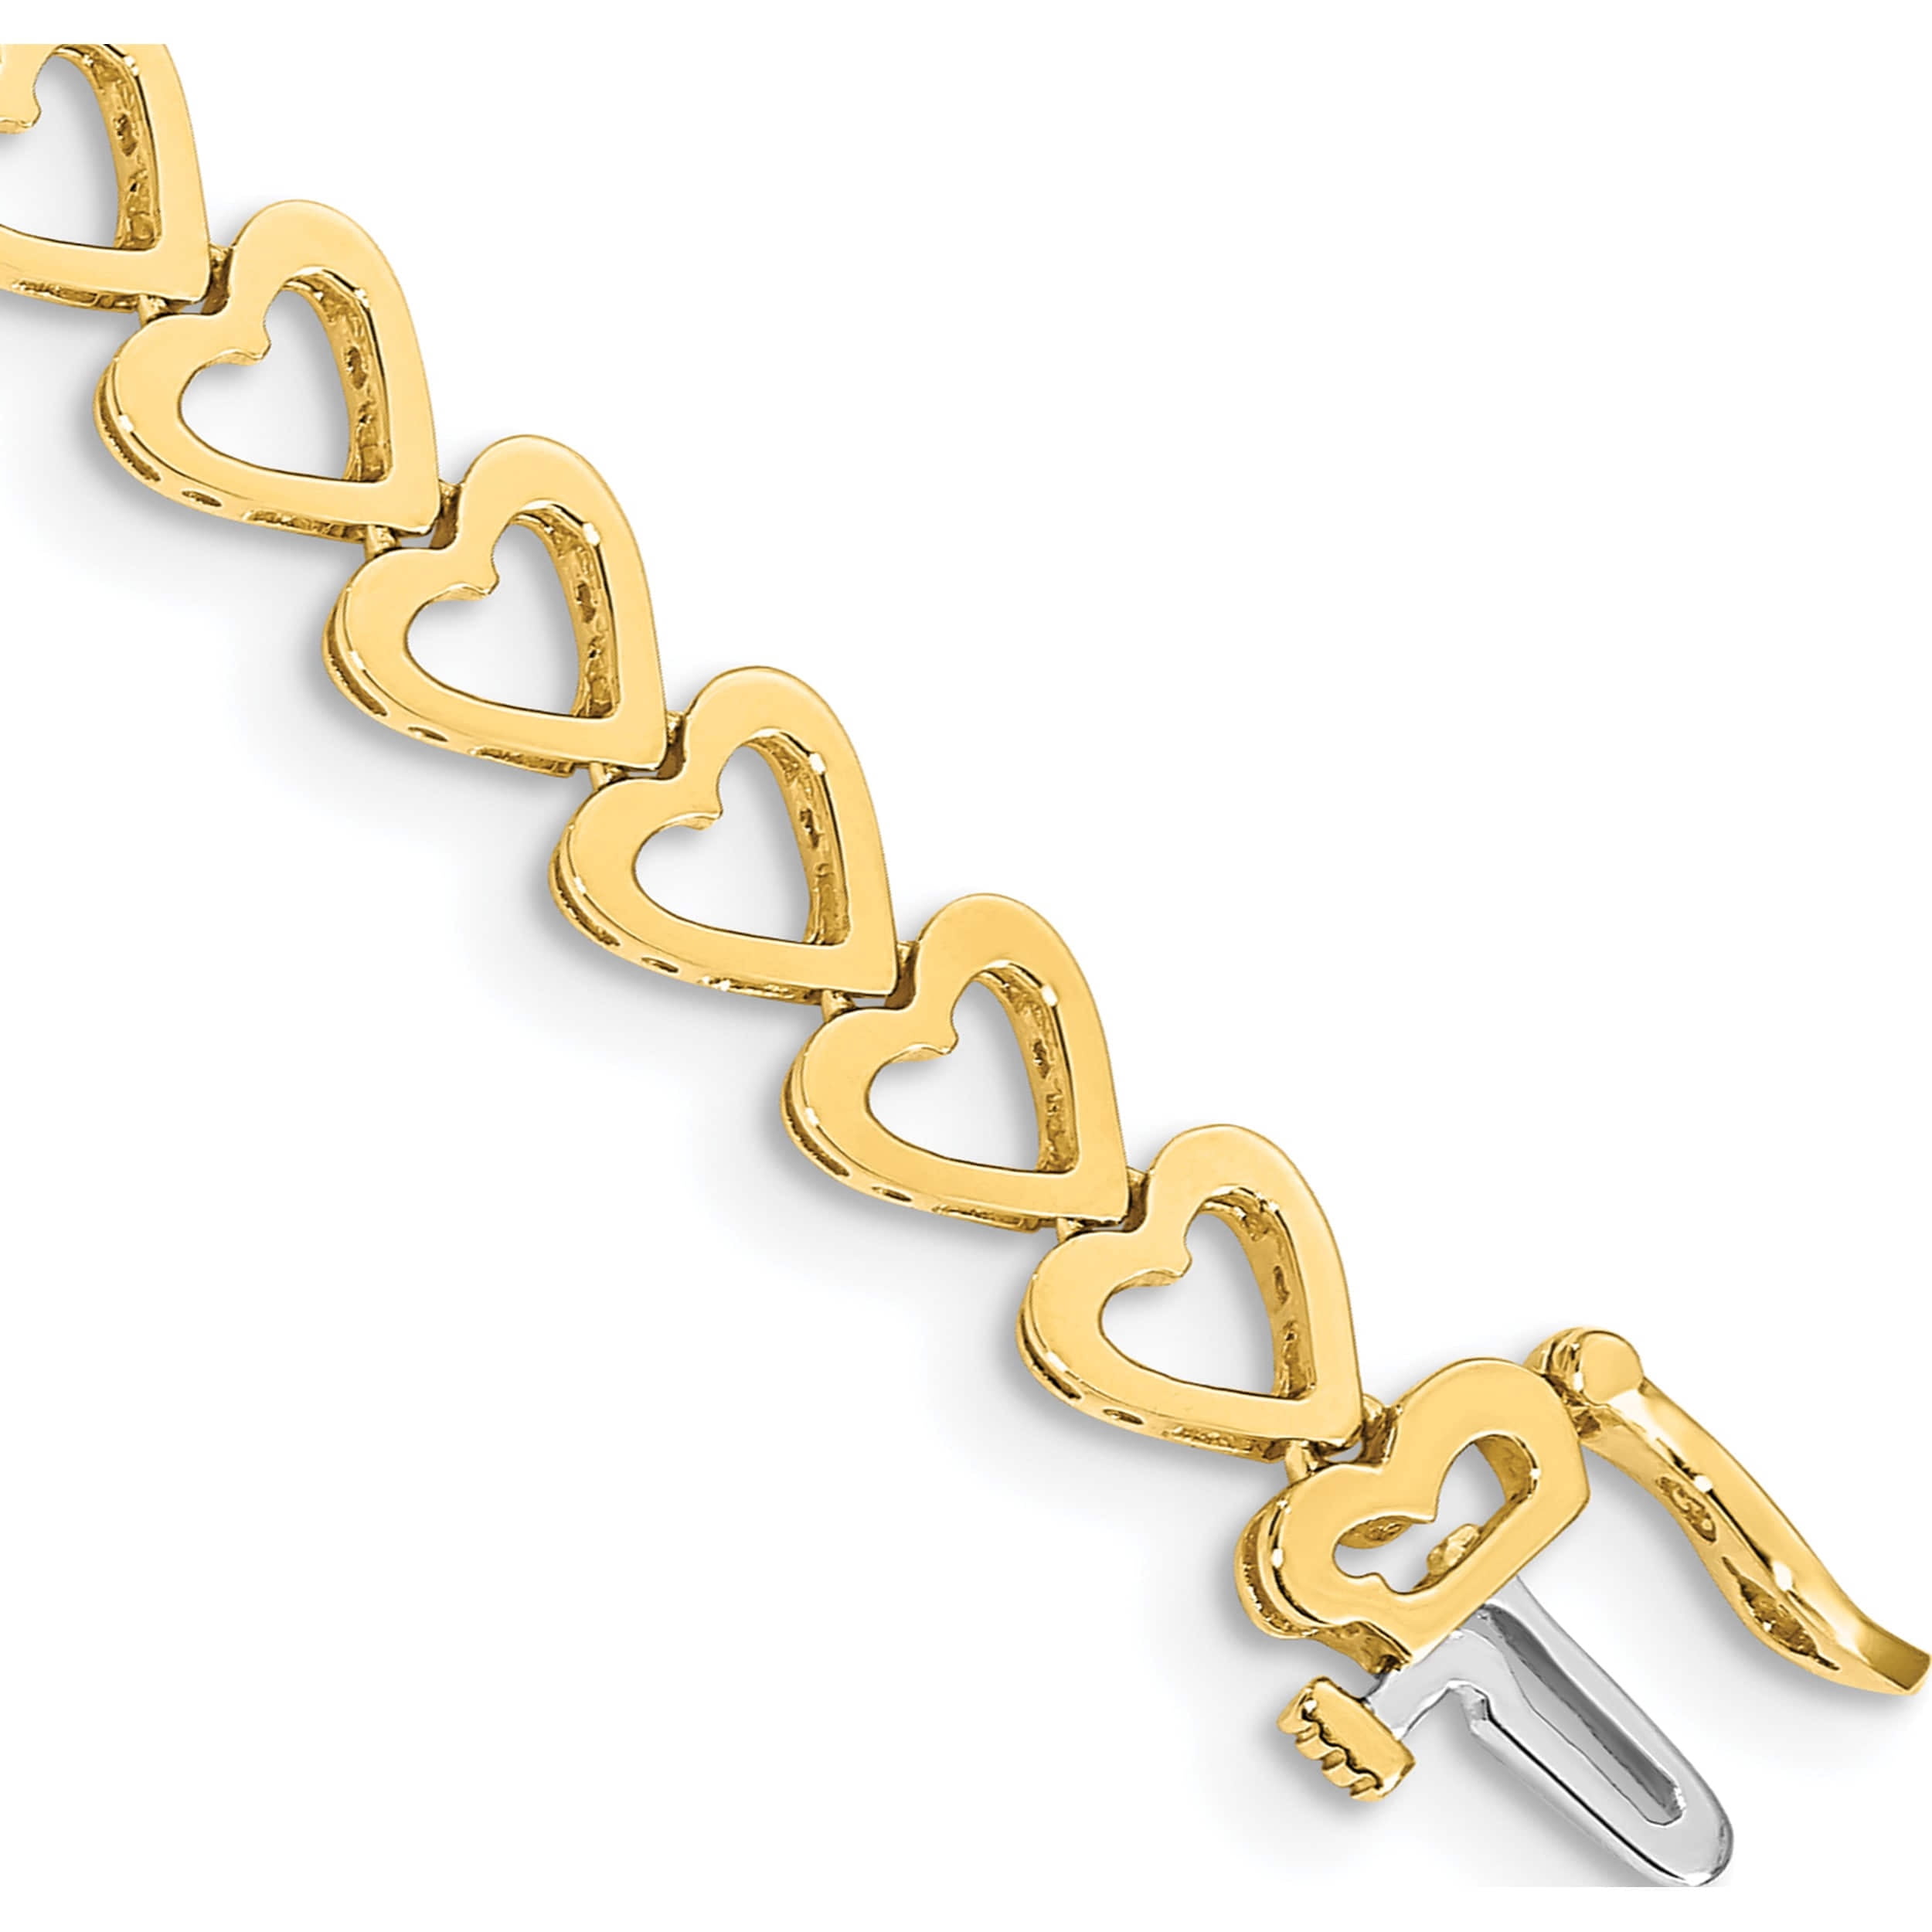 14K Yellow Gold Holds 25 Stones Up To 2.75mm Heart-Shaped Add-A-Dia.  Bracelet (7 X 7.5) Made In Mexico x849